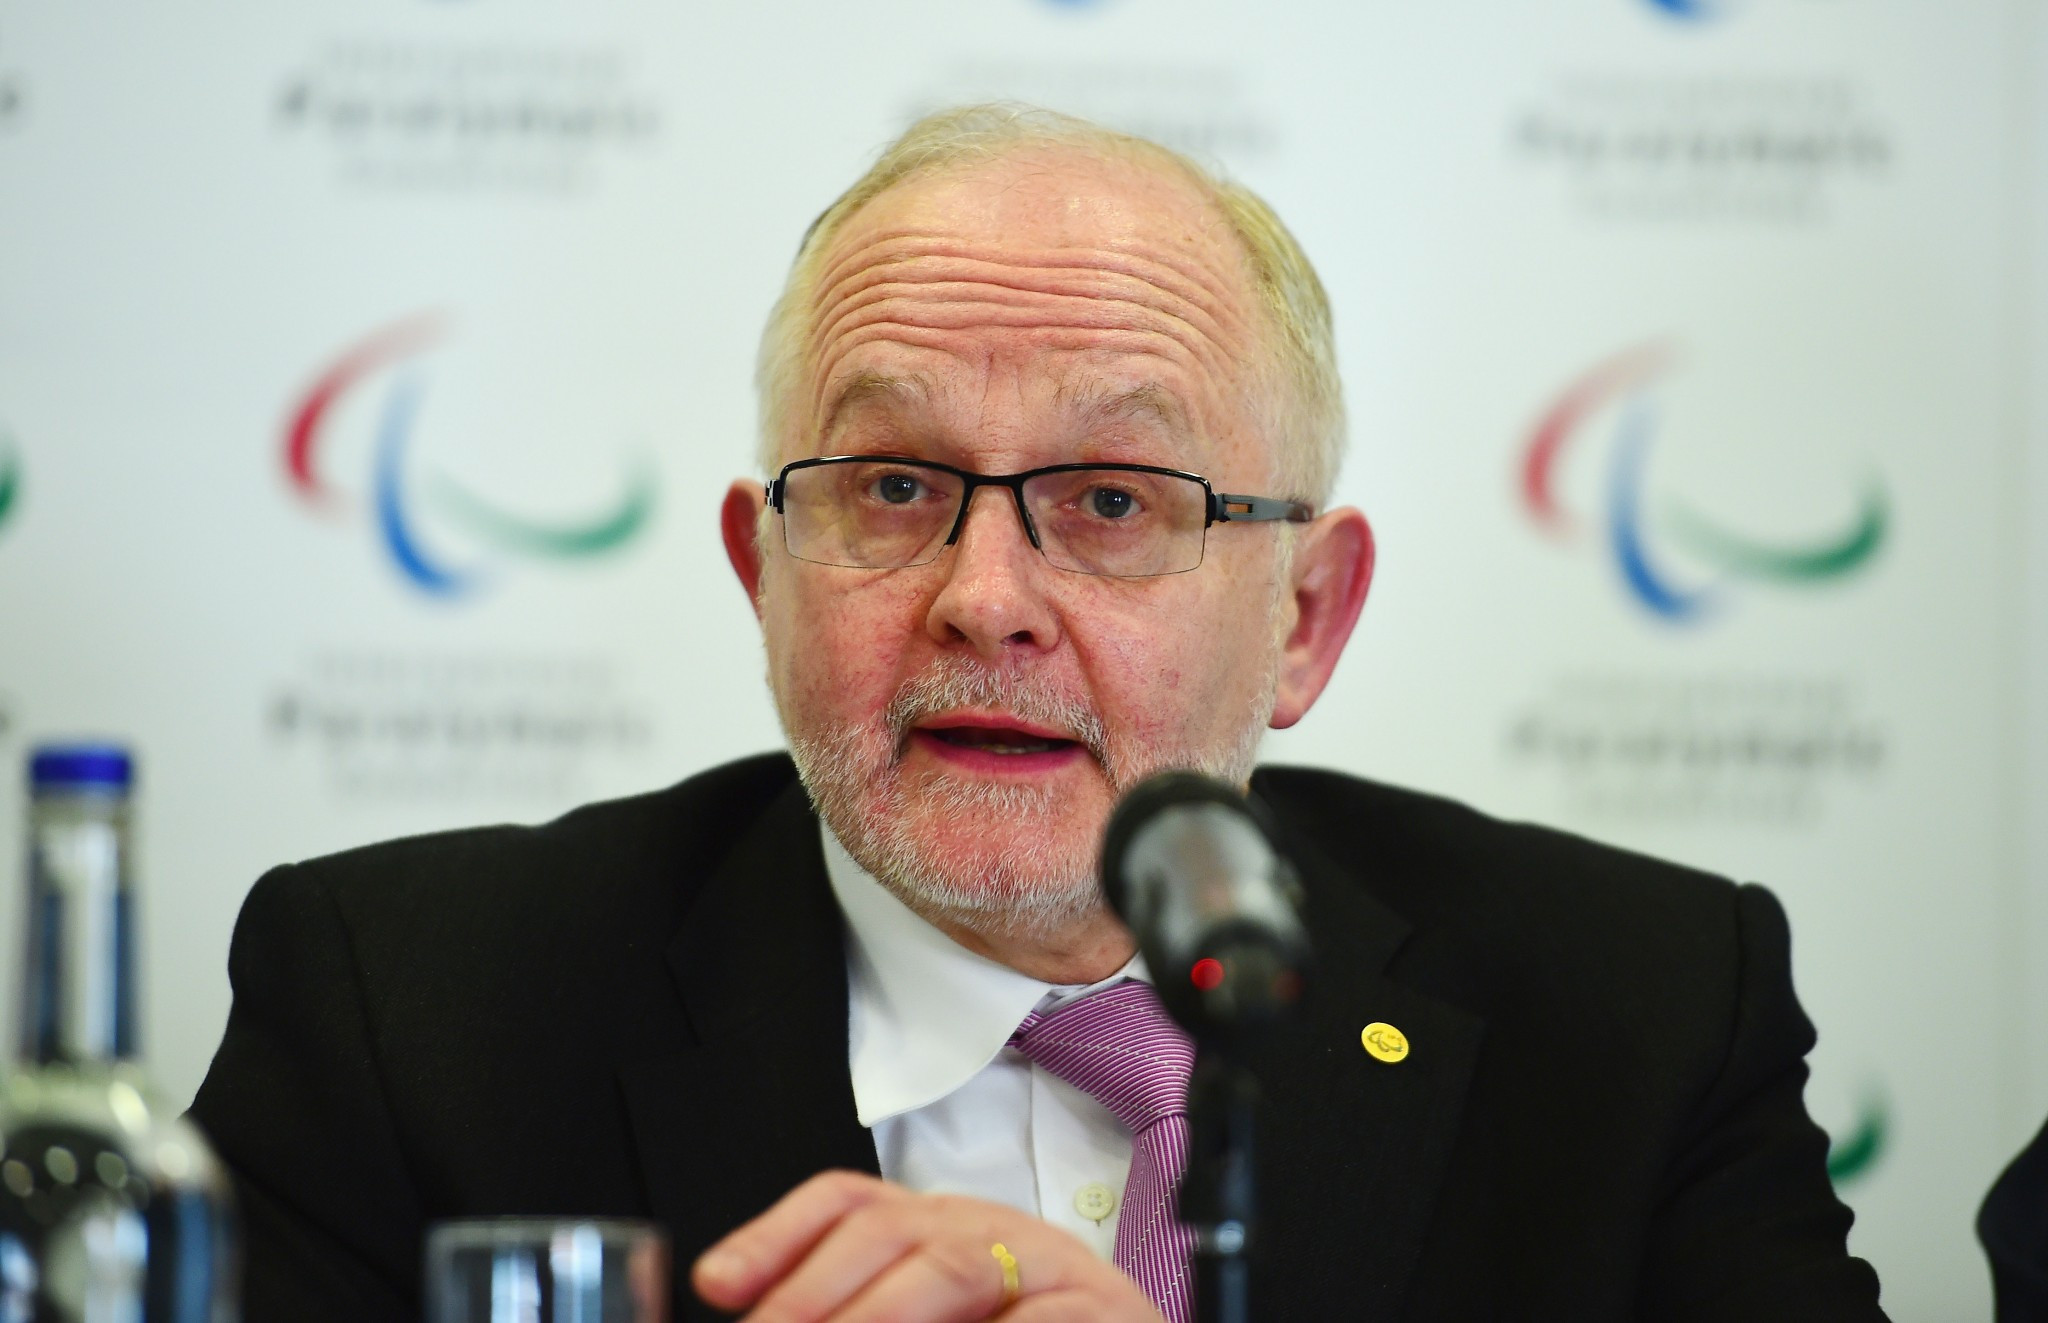 Sir Philip Craven's 16-year tenure as IPC President is coming to an end ©Getty Images